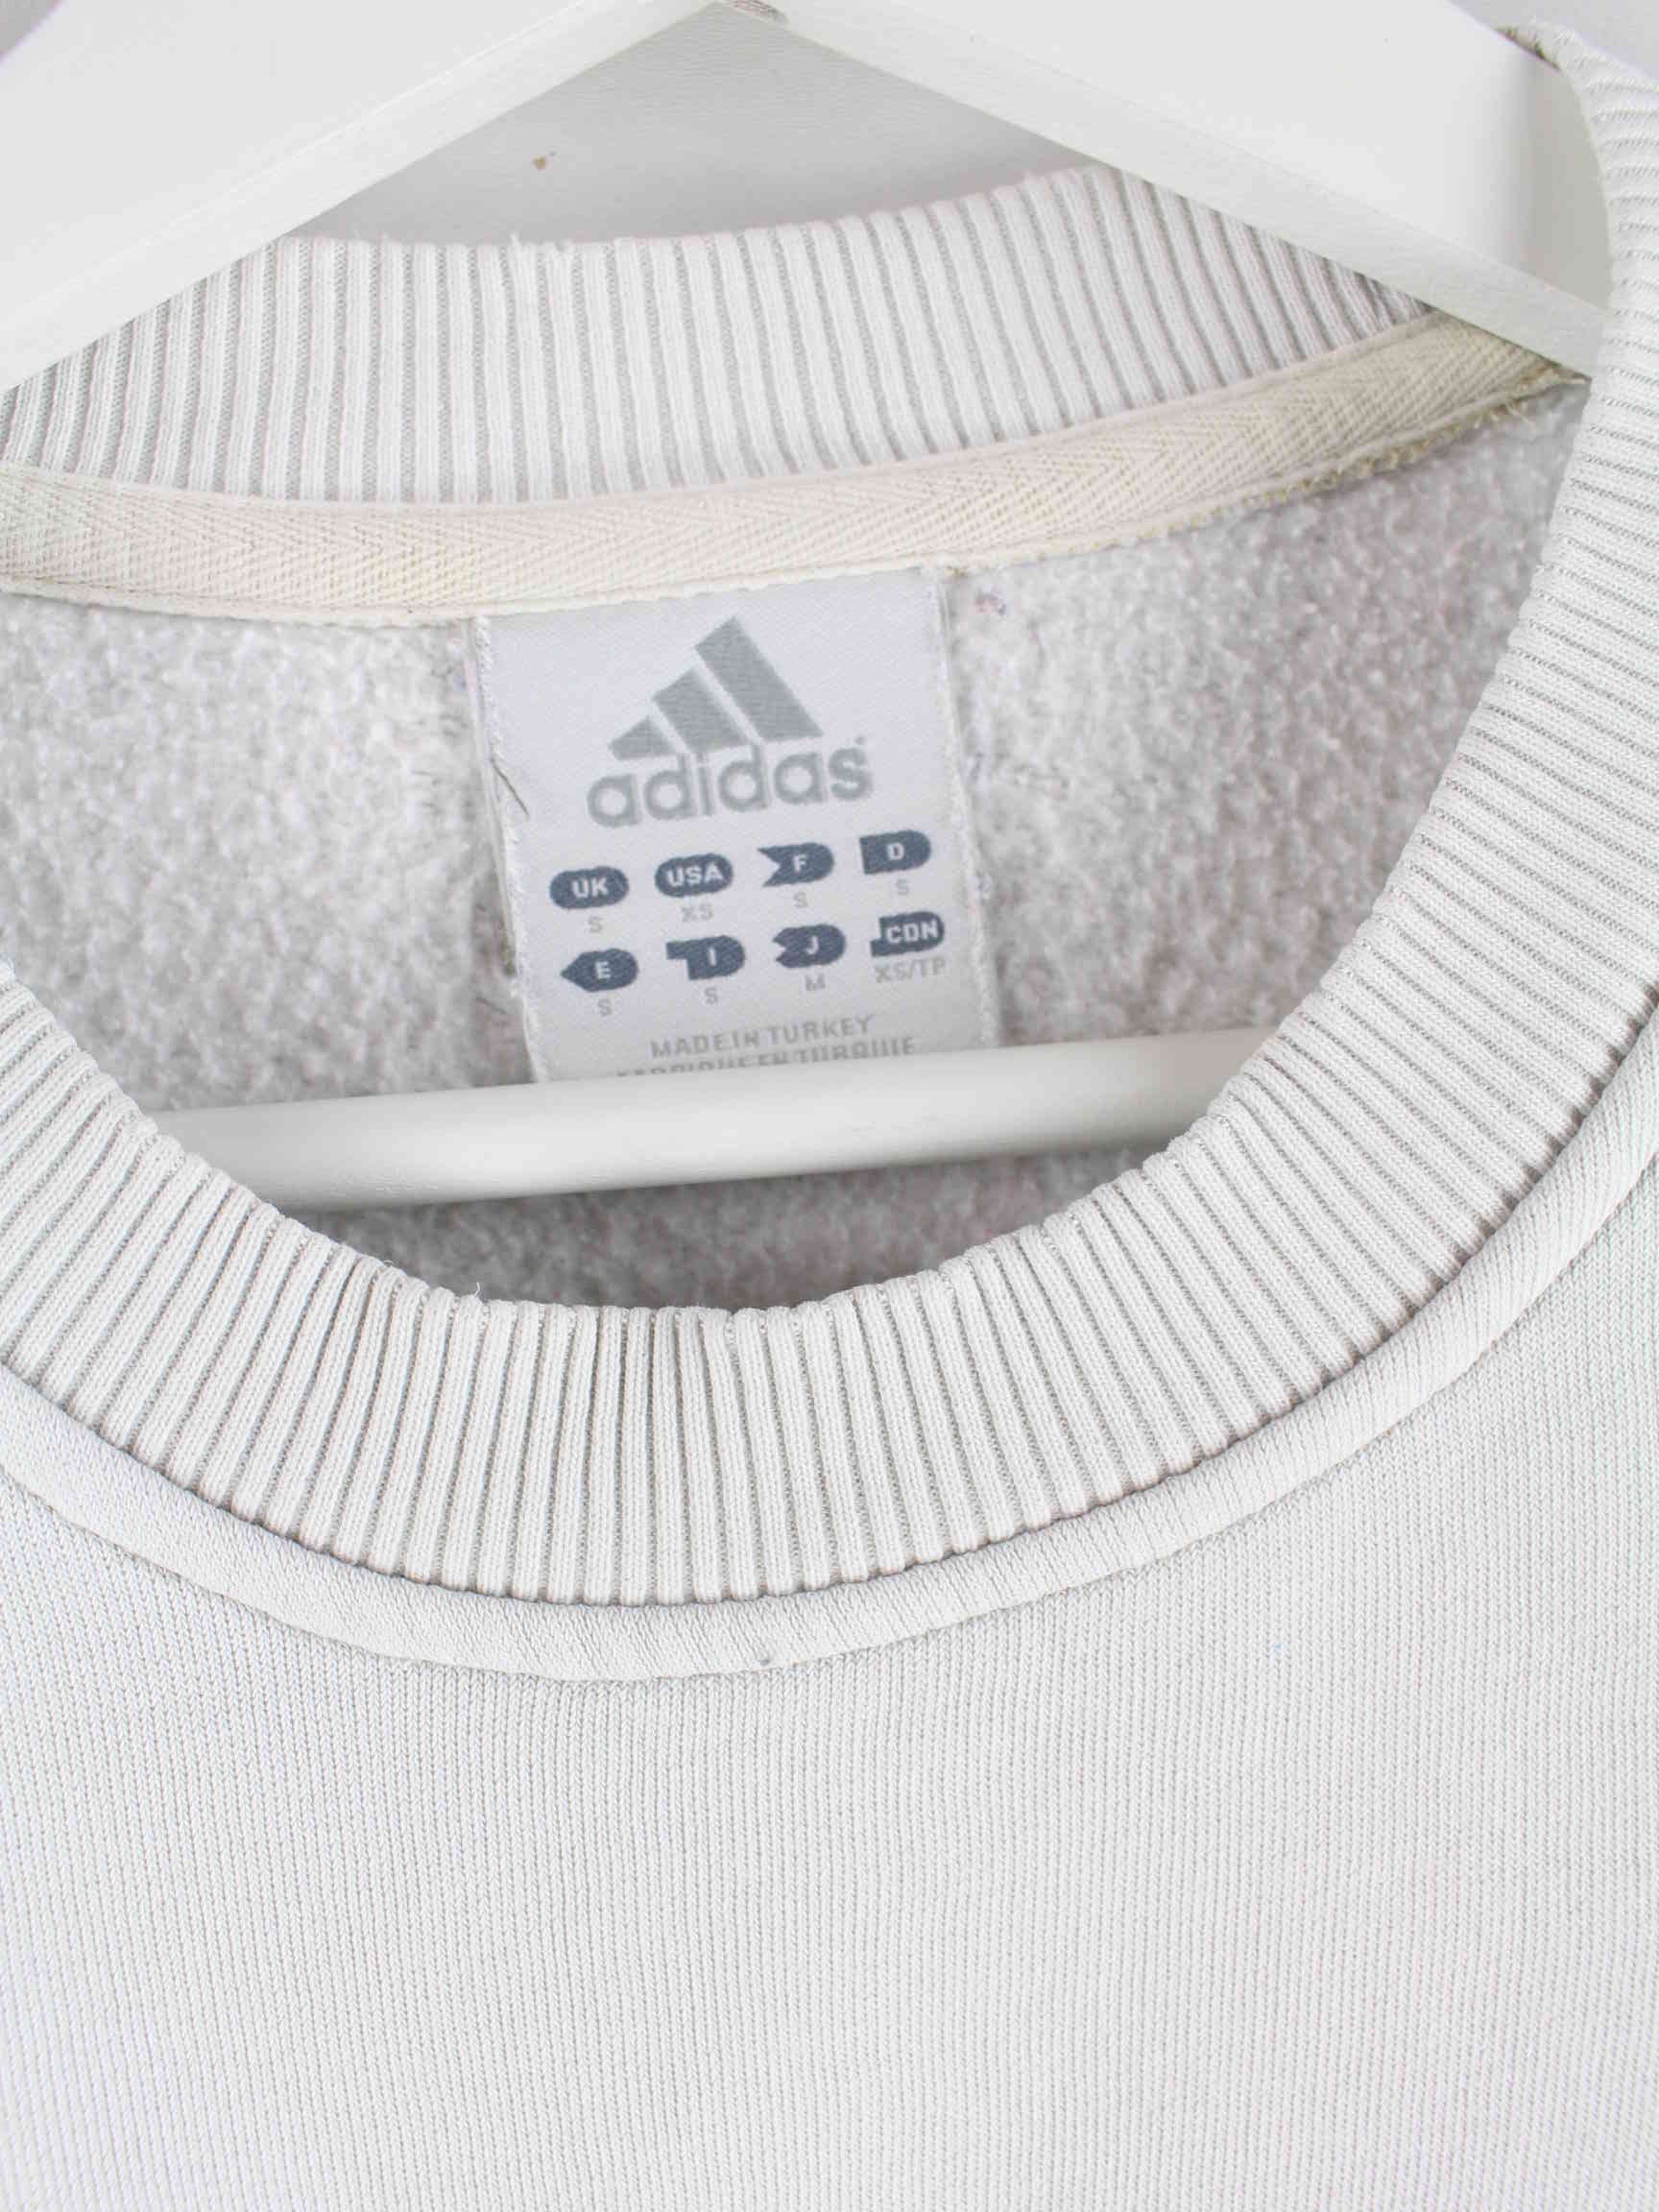 Adidas y2k Embroidered Sweater Beige S (detail image 2)